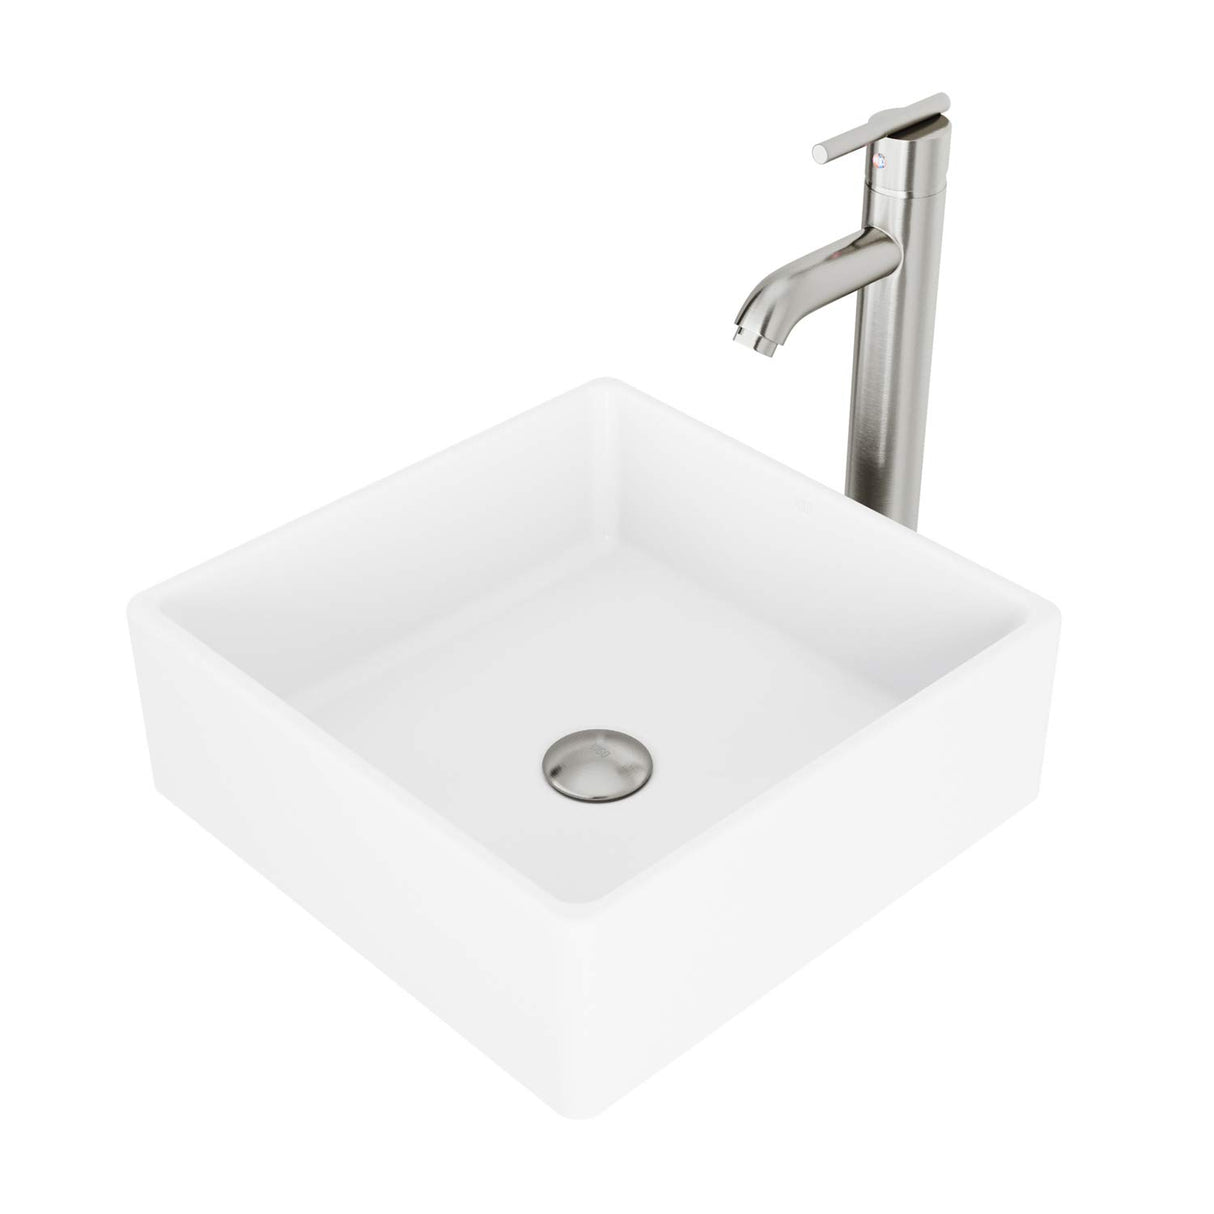 VIGO VGT1001 14.5" L -14.5" W -13.0" H Dianthus Handmade Matte Stone Square Vessel Bathroom Sink Set in Matte White Finish with Brushed Nickel Single-Handle Single Hole Faucet and Pop Up Drain